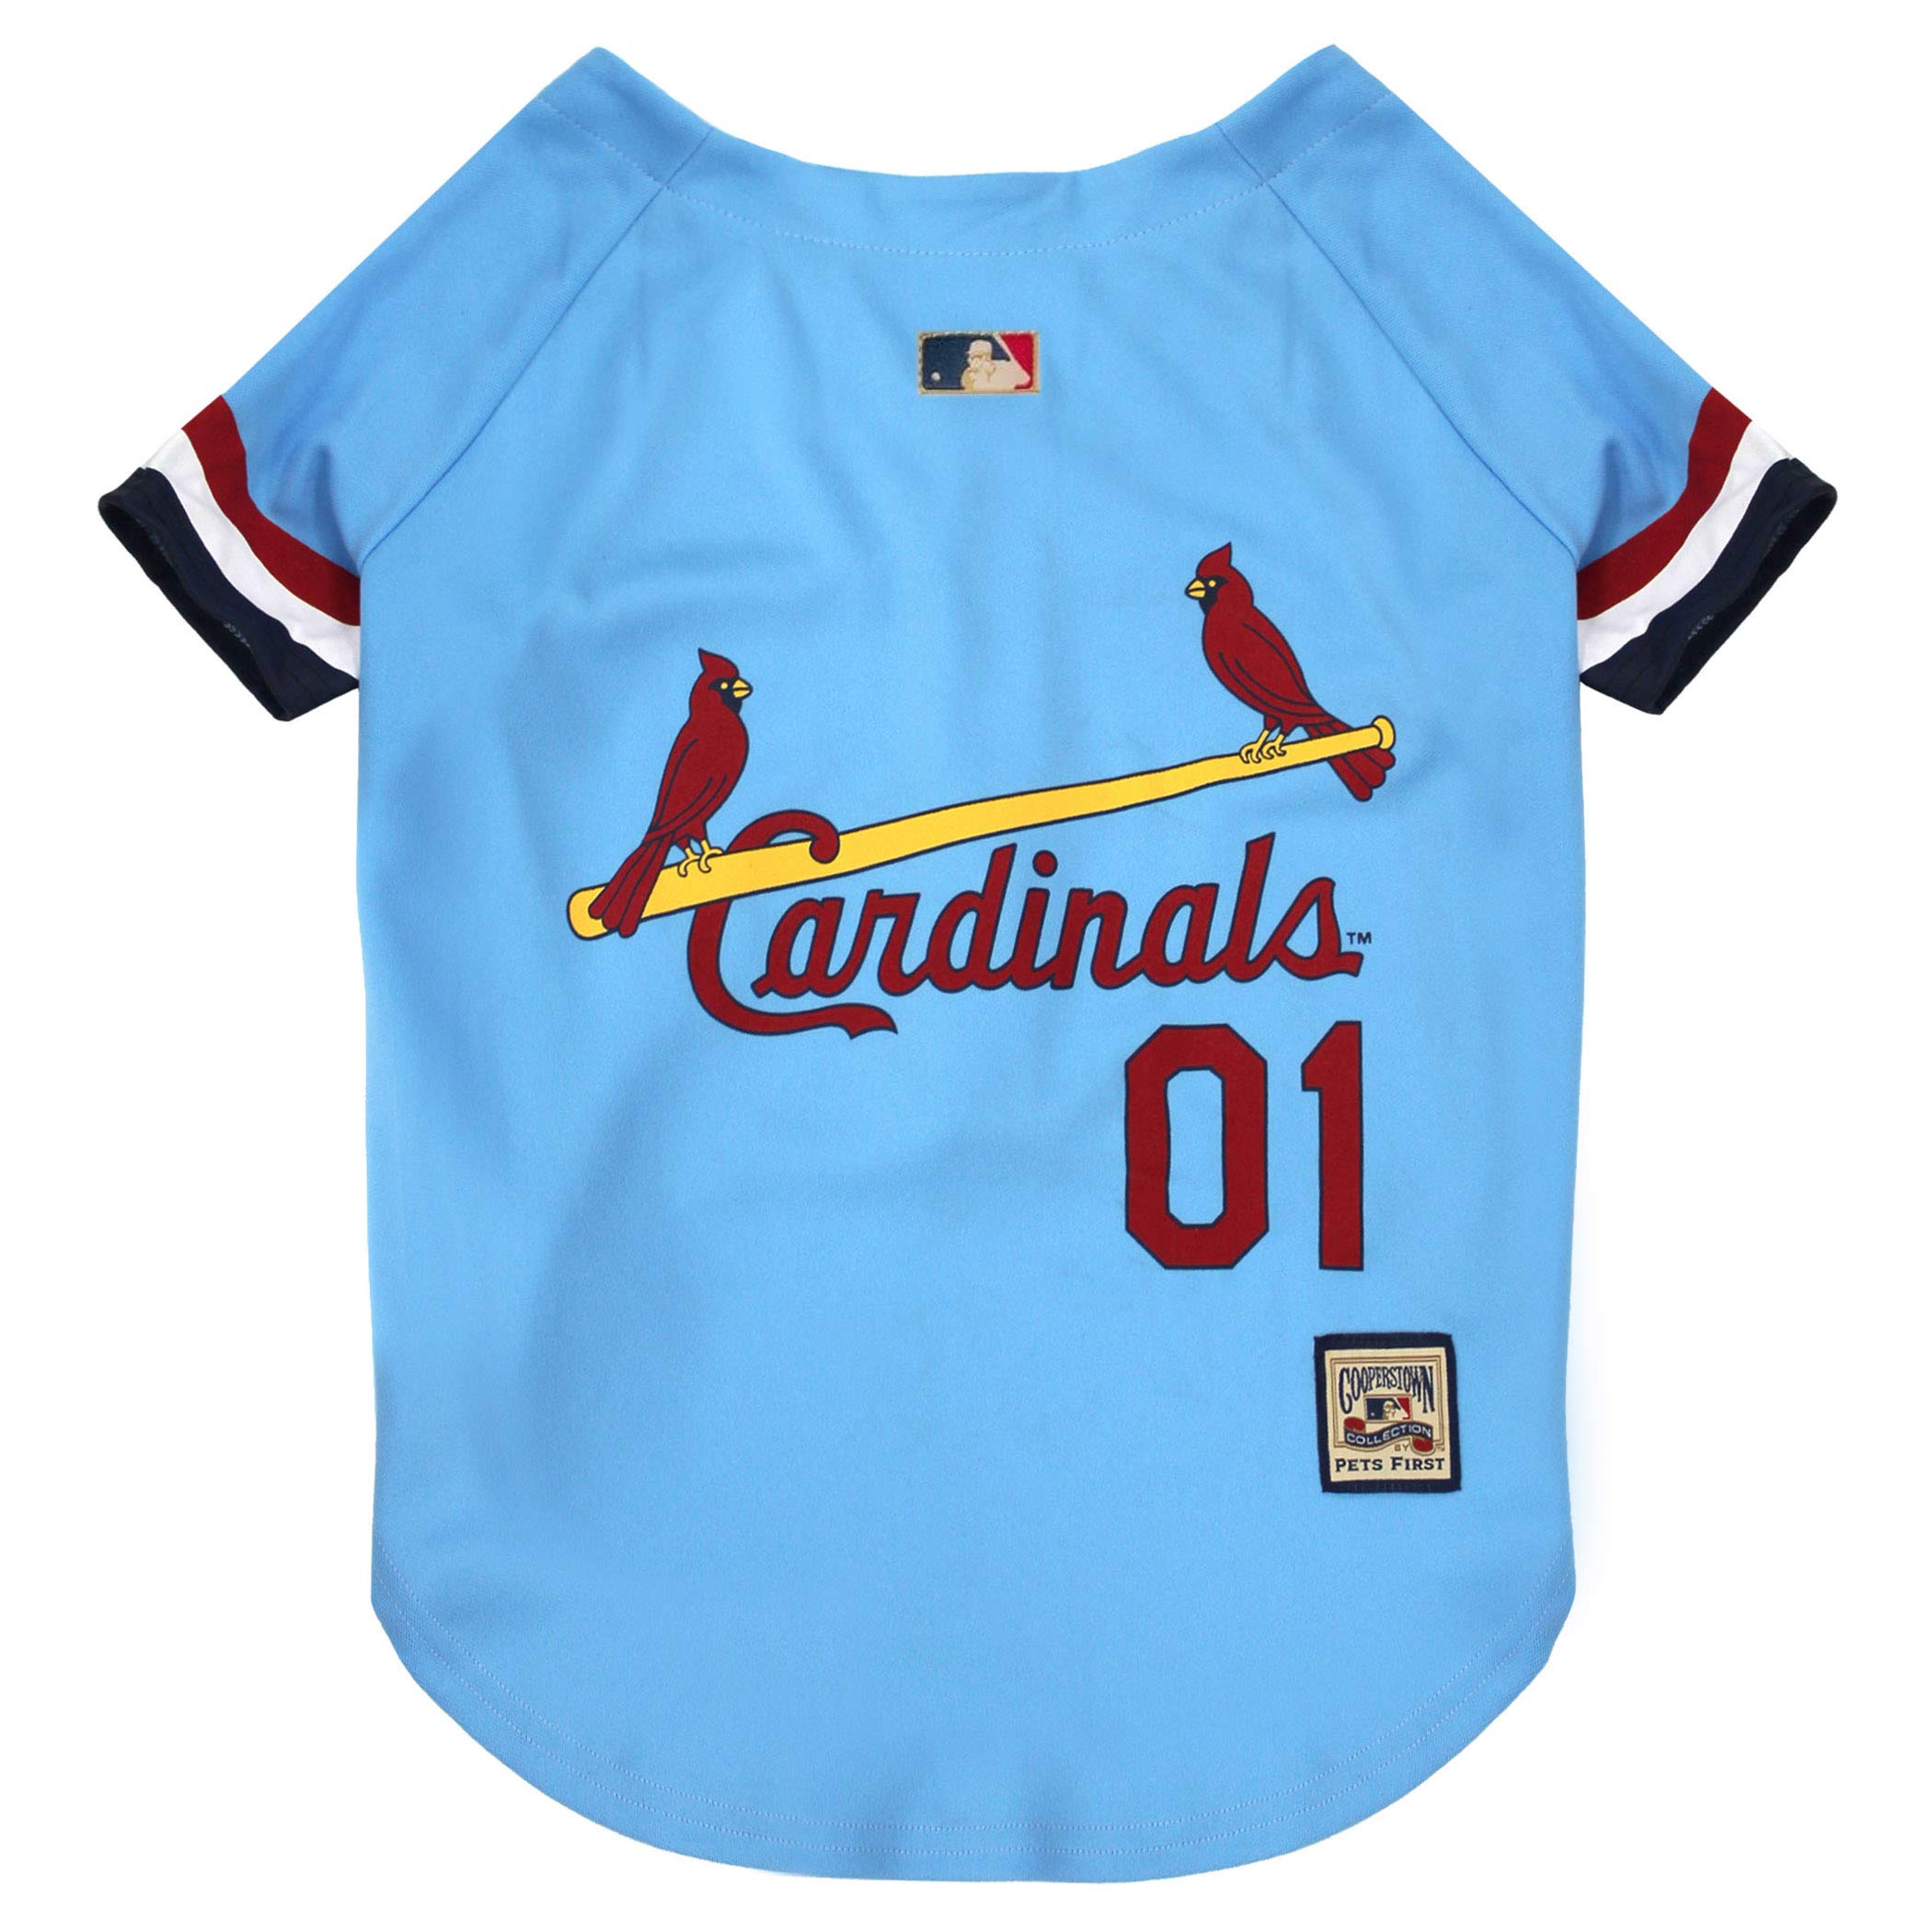 St. Louis Cardinals on X: We're proudly wearing our St. Louis